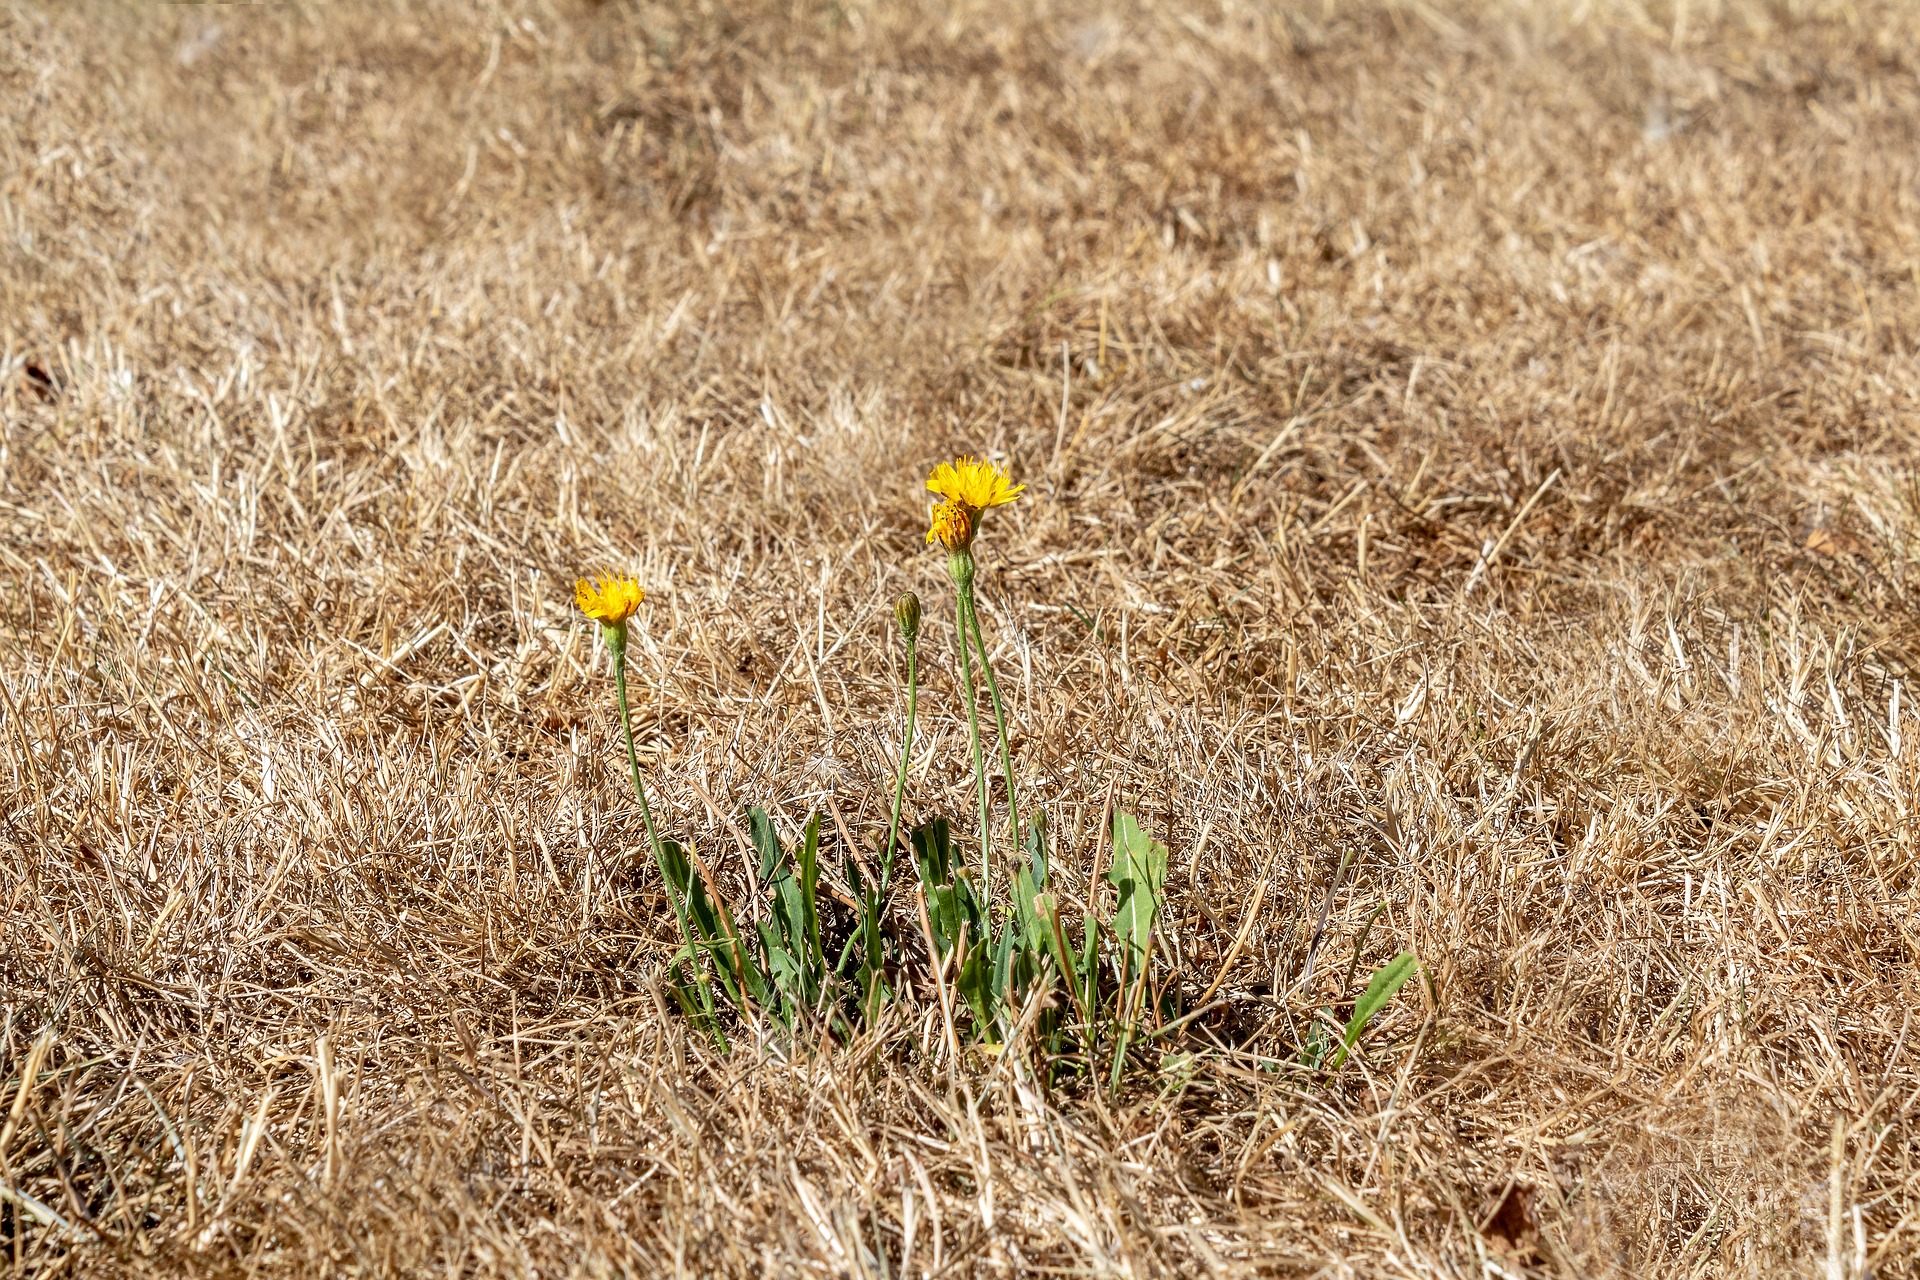 Dried grass and flowers in a drought and heat wave